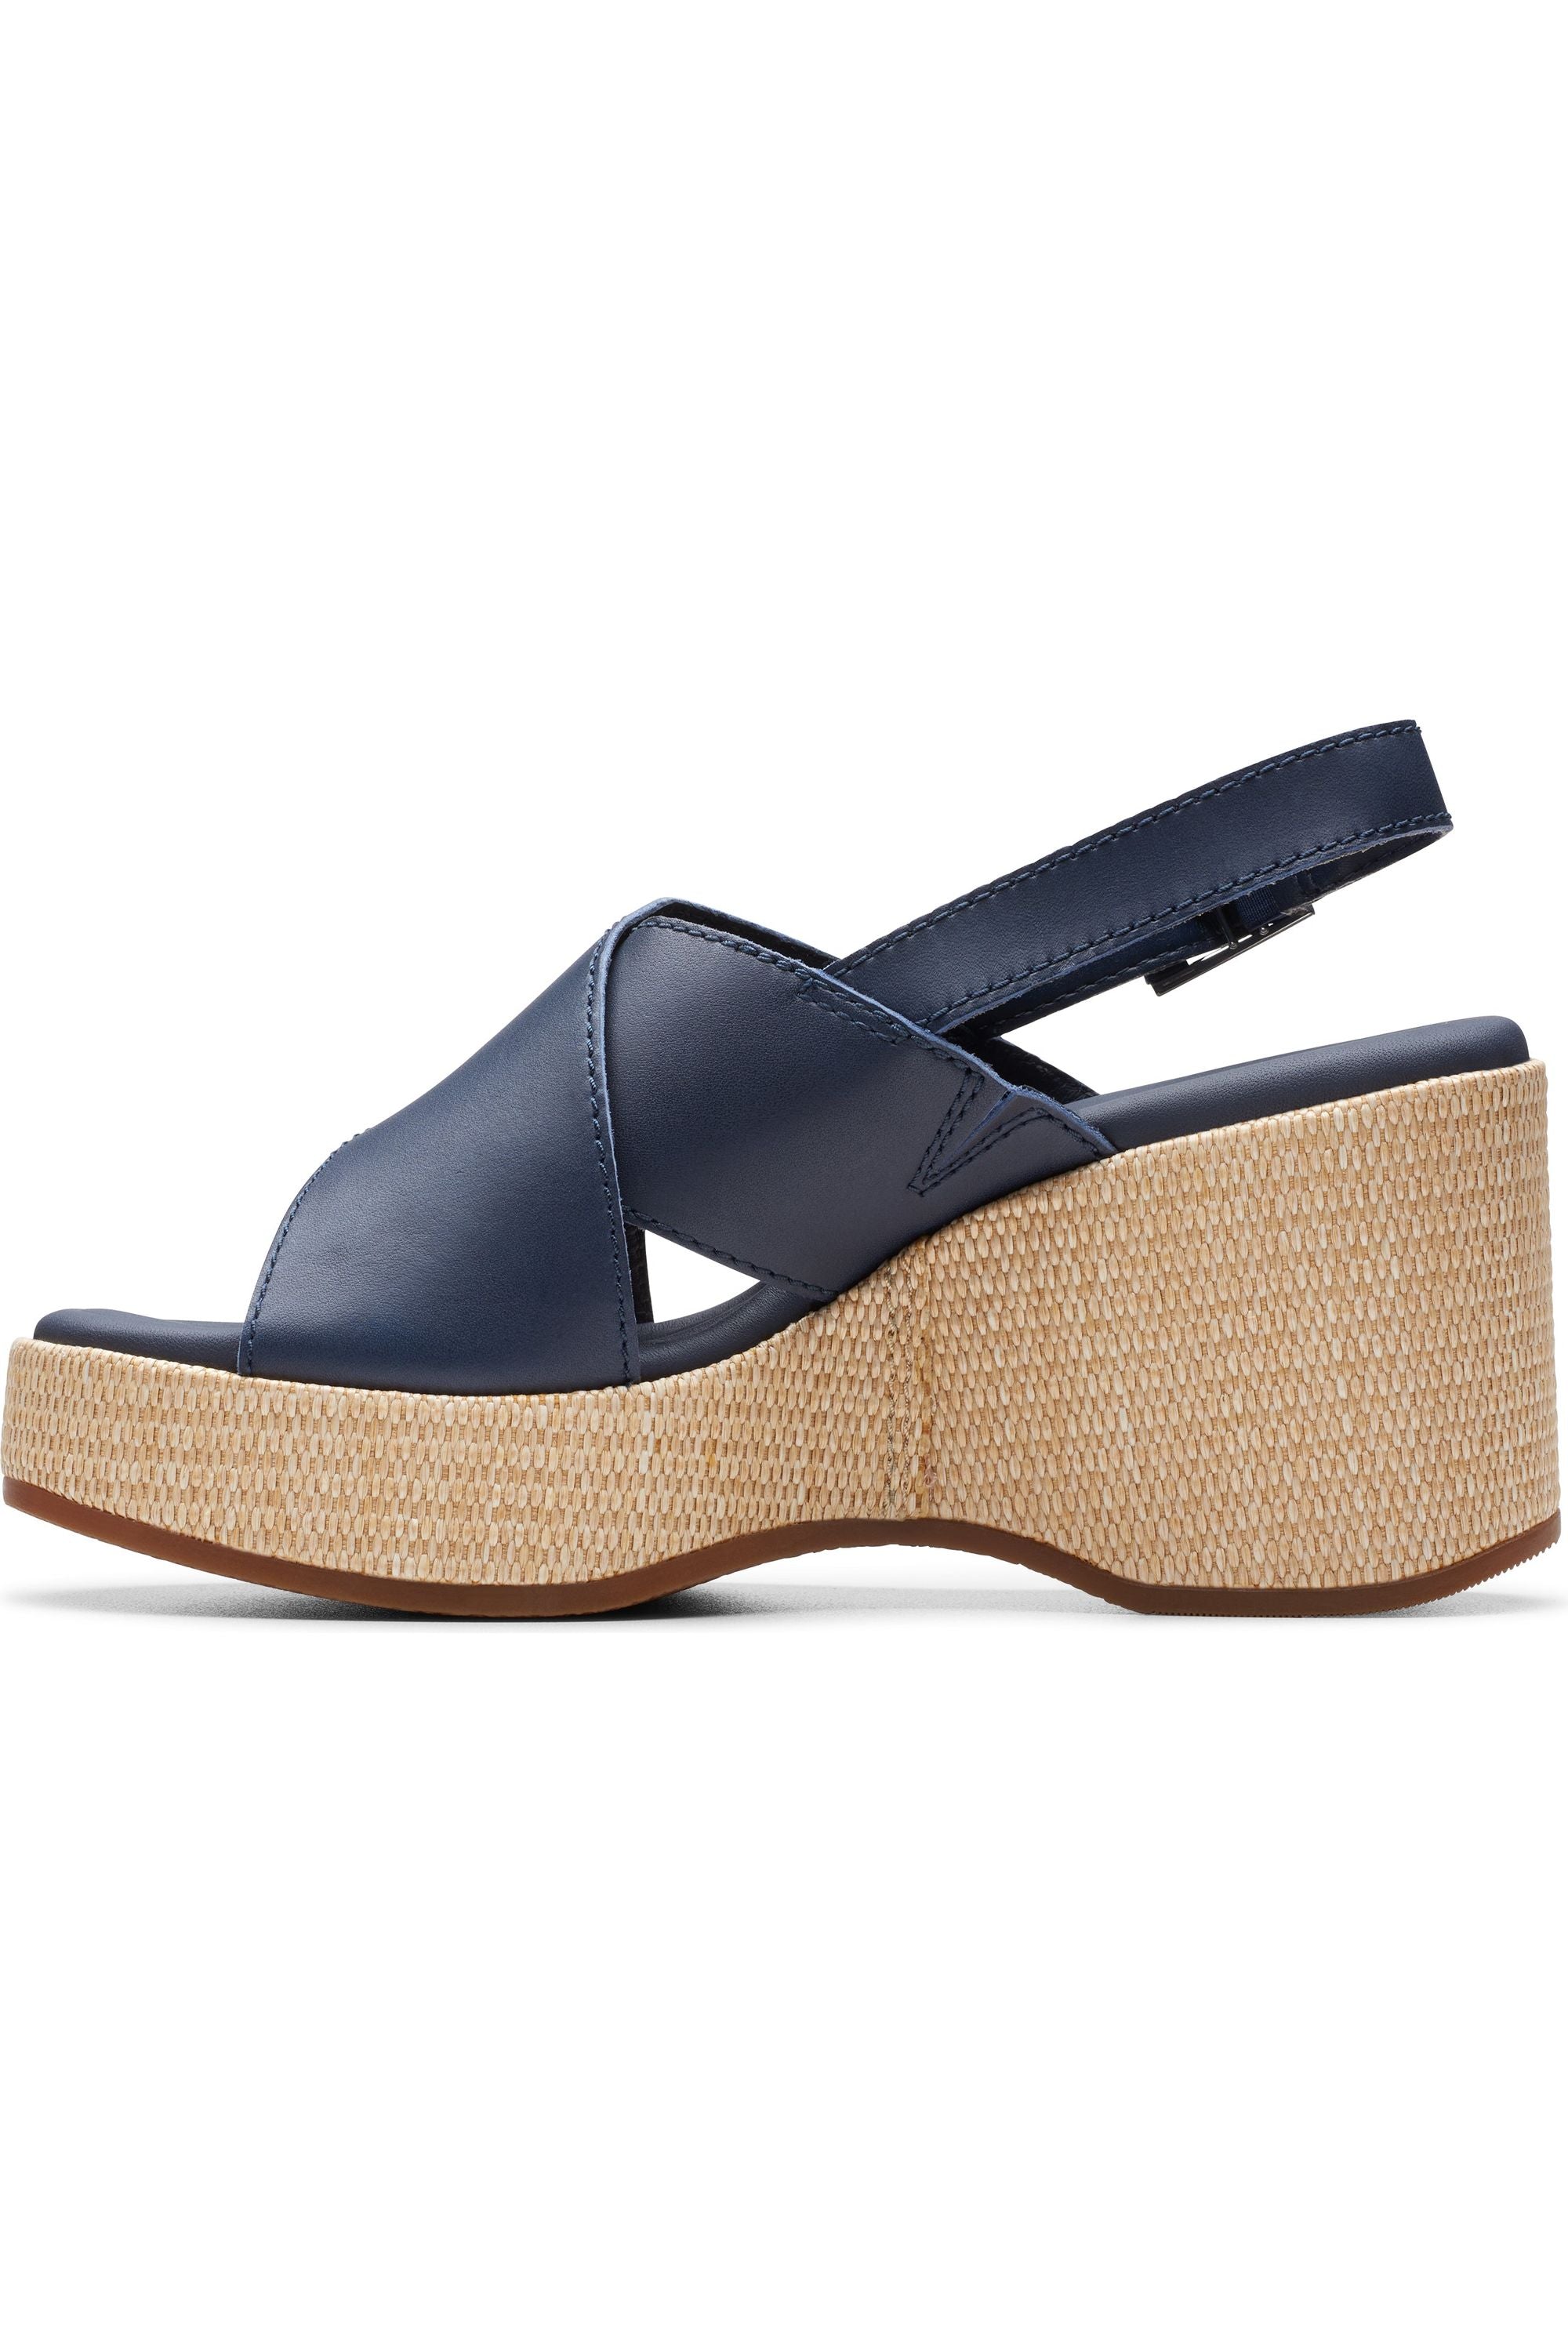 Clarks Manon Wish in Navy Leather